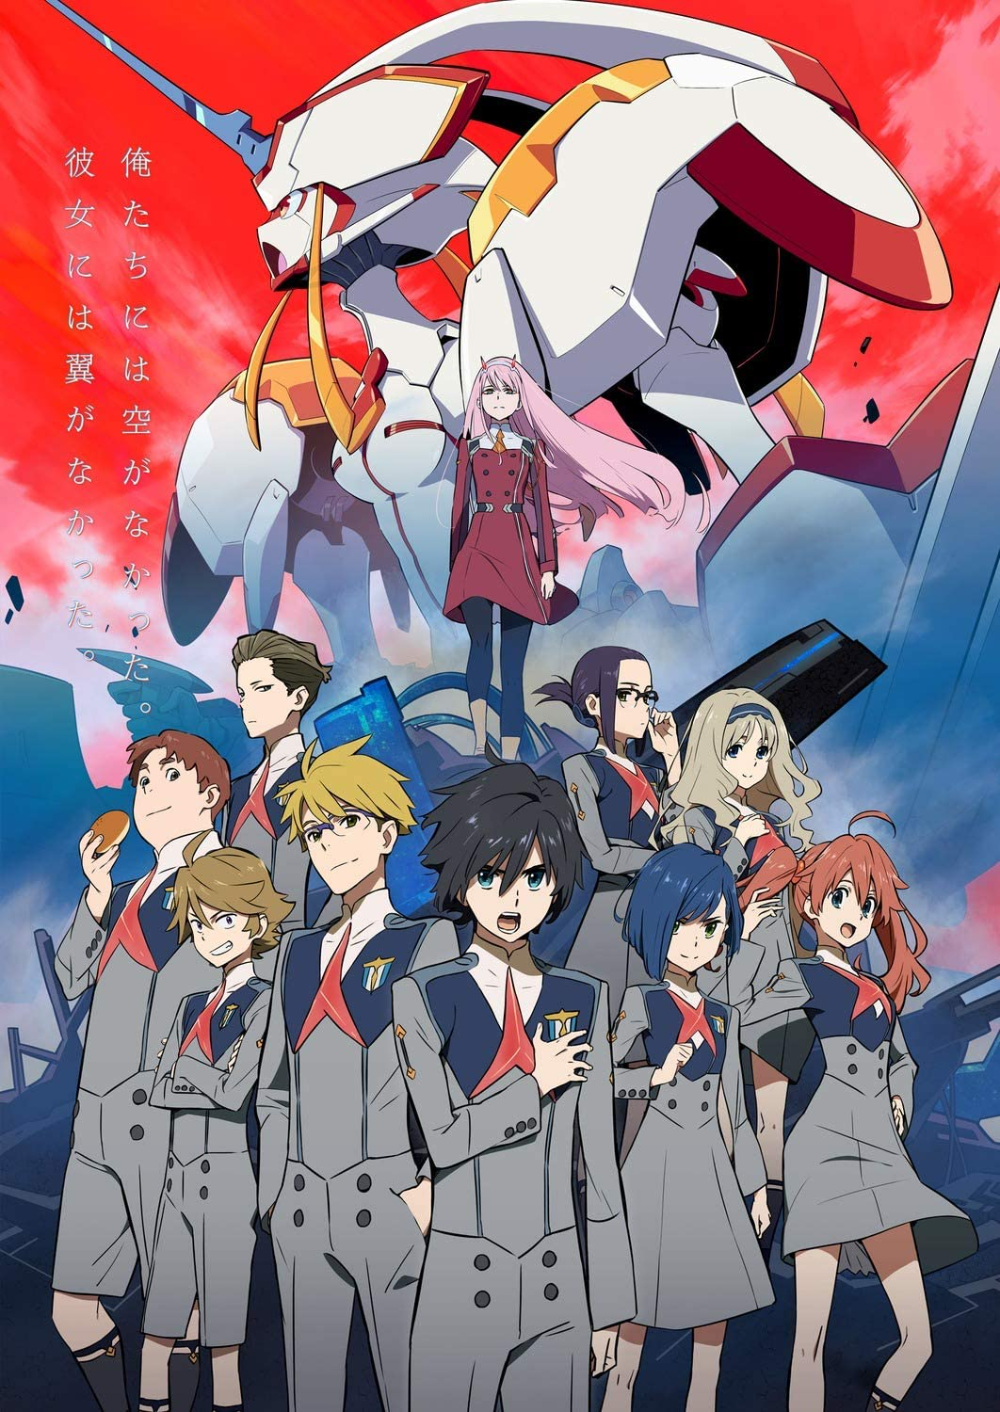 Darling in The Franxx Anime Poster and Prints Unframed Wall Art Gifts Decor 12x18"